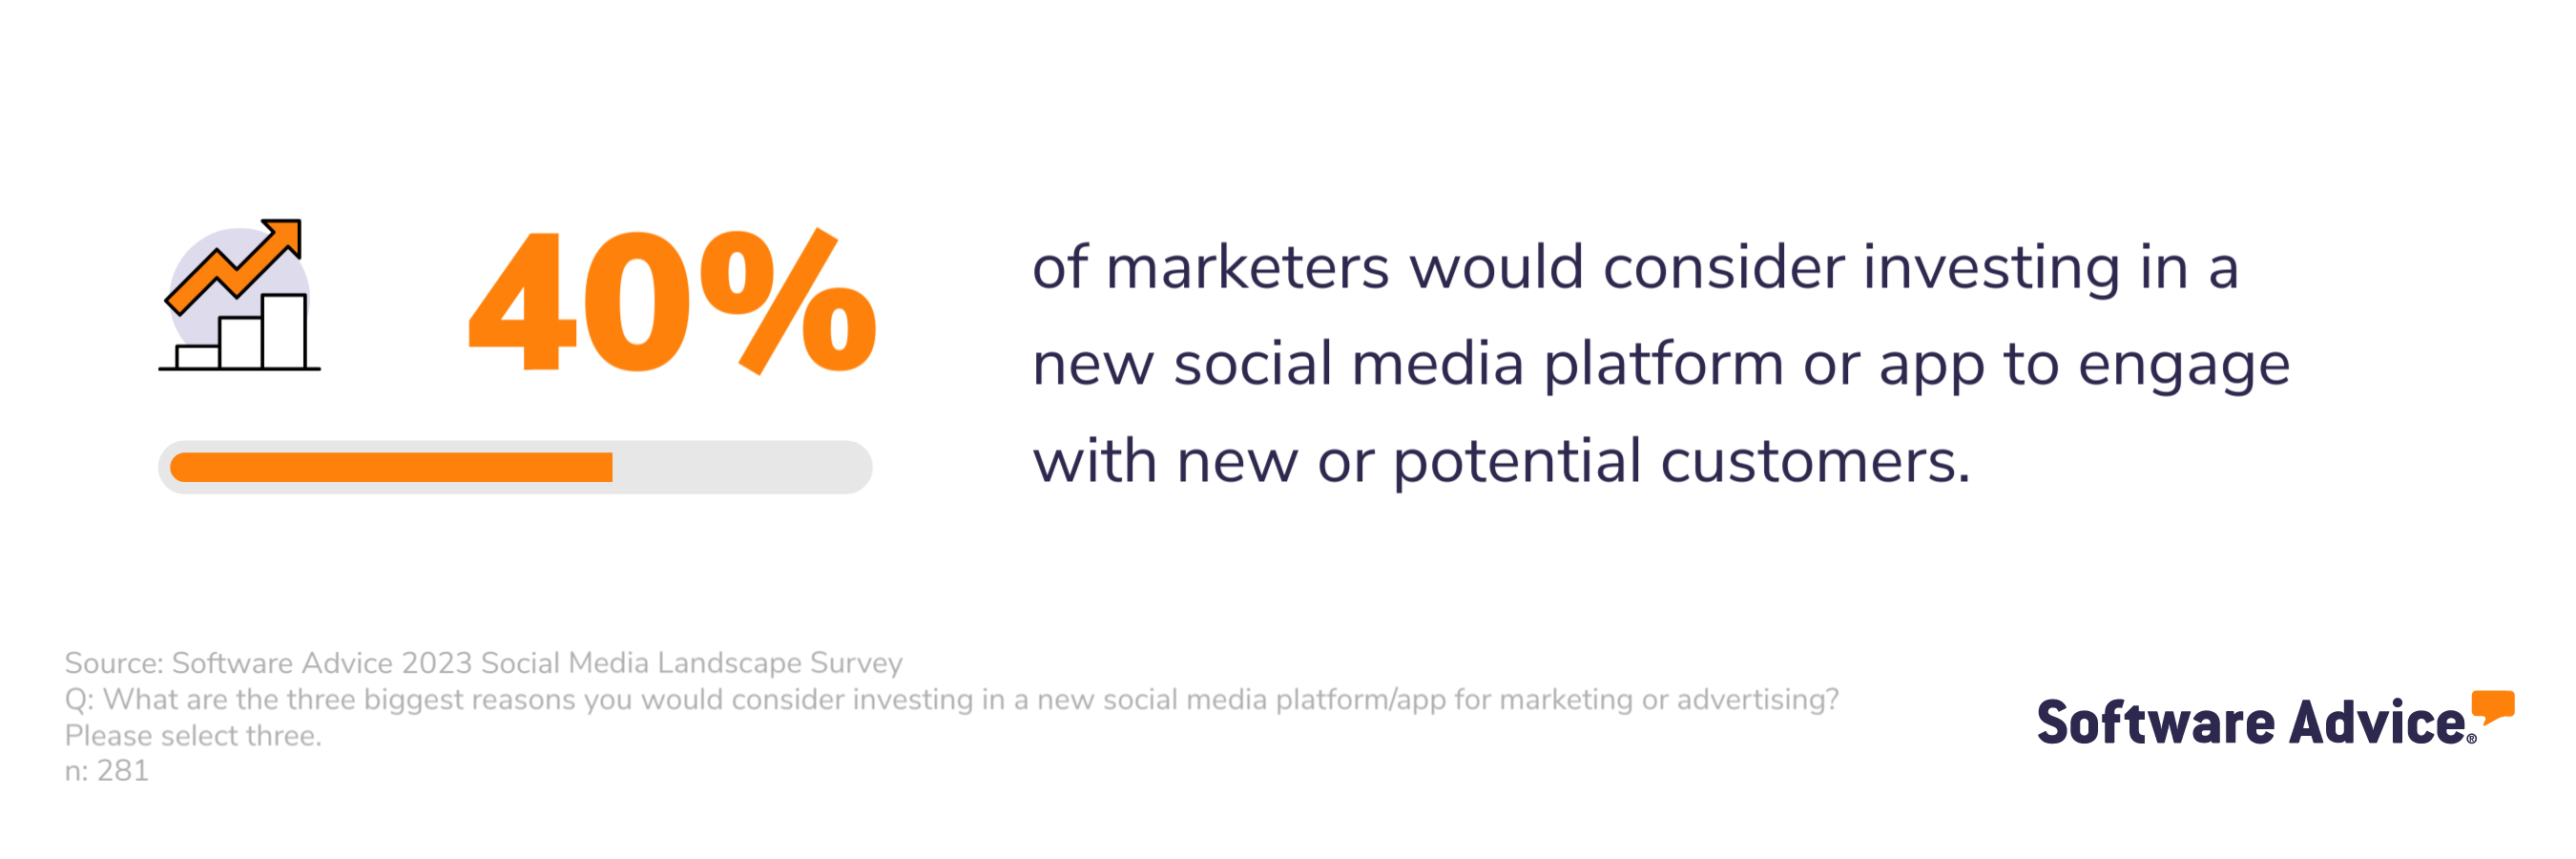 40% of marketers would consider investing in a new social media platform or app to engage with new or potential customers.